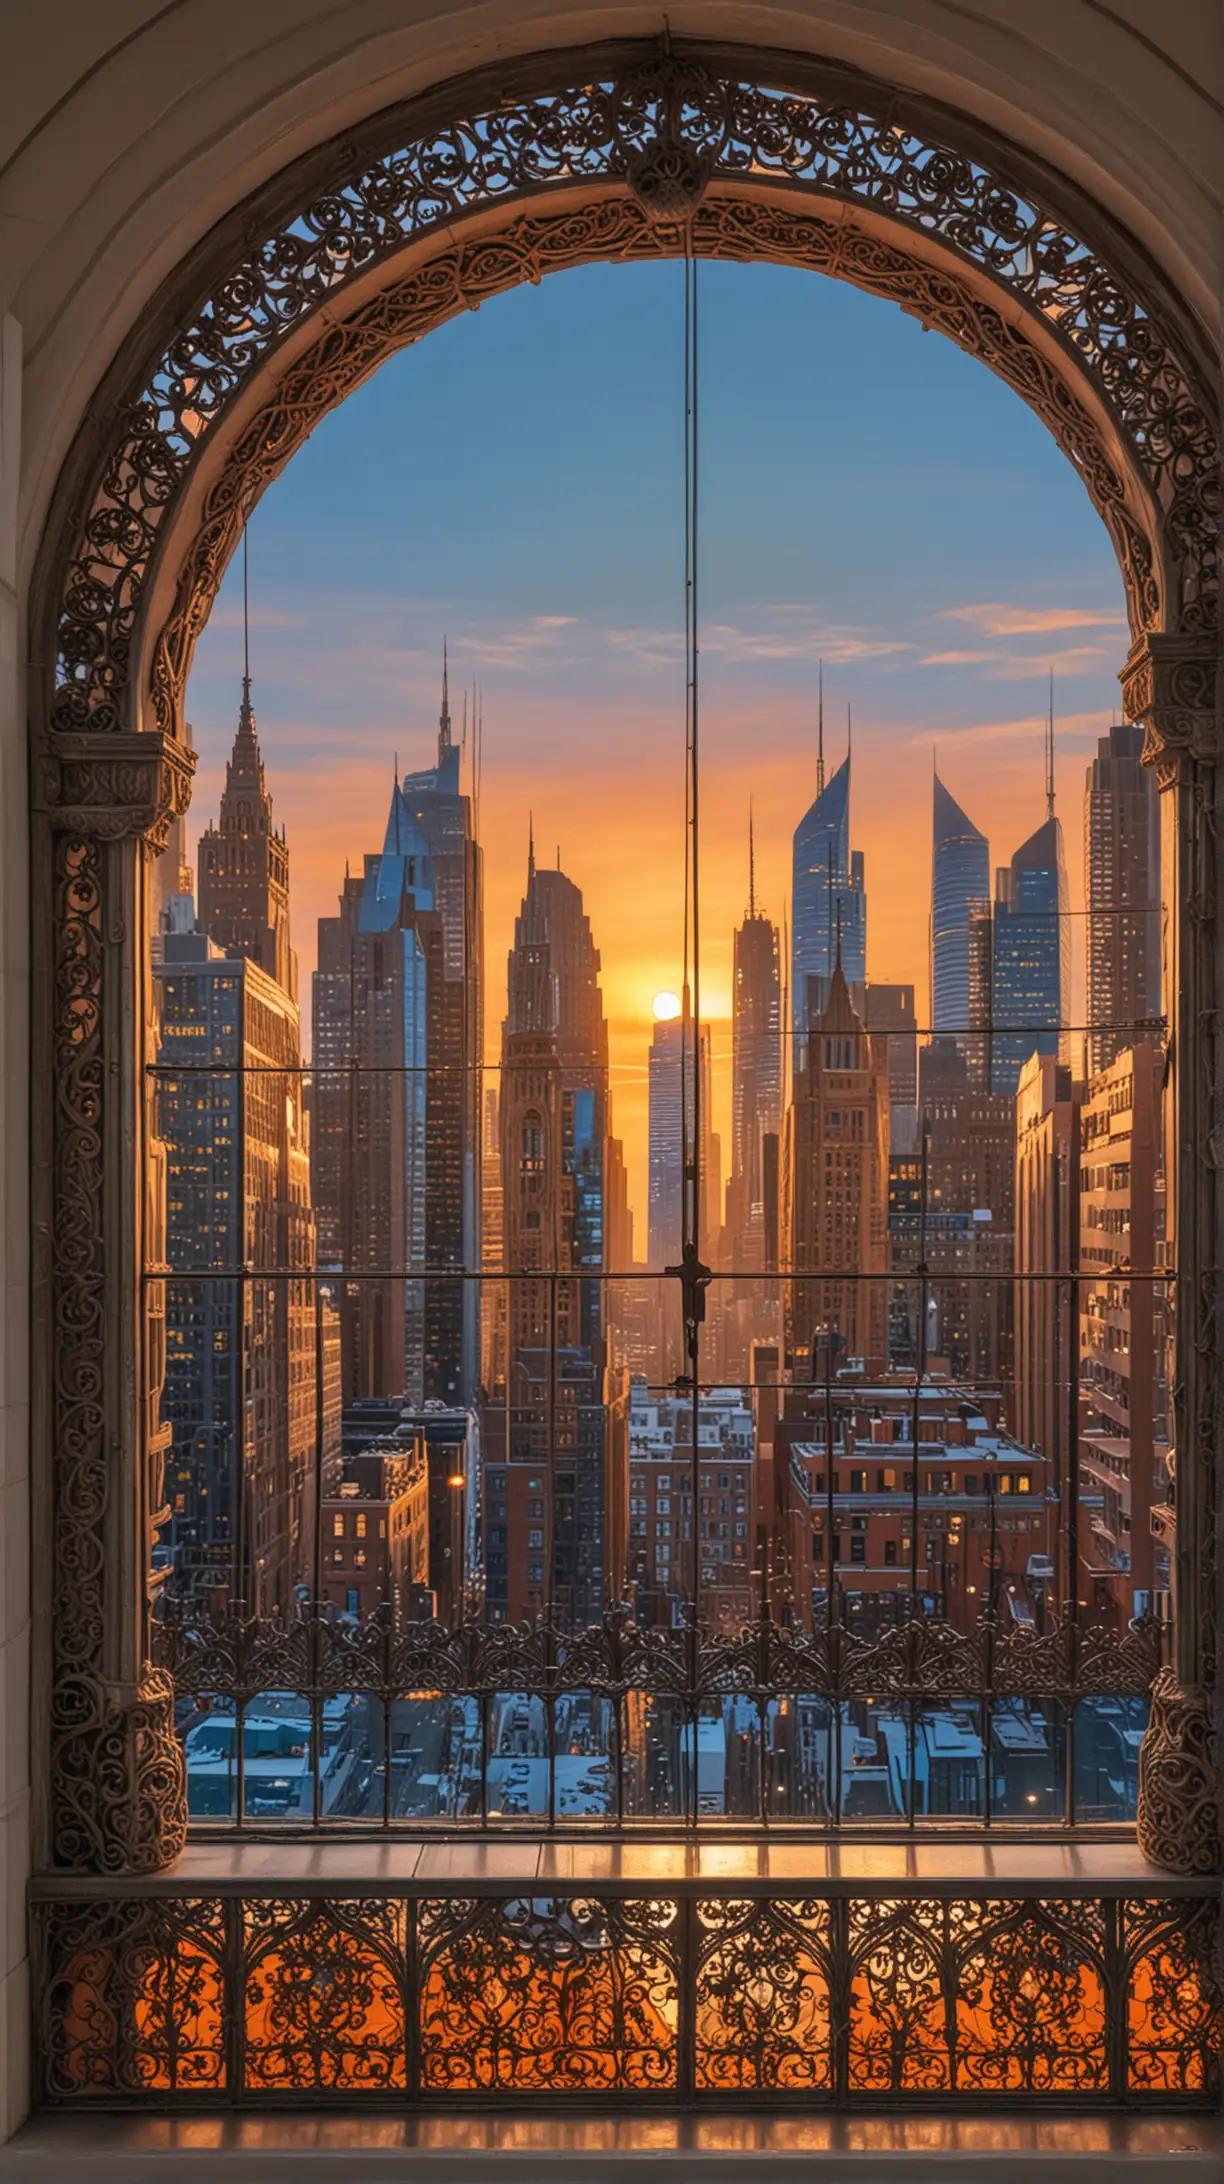 a futuristic cityscape seen through an arched window with ornate grillwork. The central focus is a towering skyscraper surrounded by other high-rise buildings, and the sky displays hues of orange and blue, suggesting either sunrise or sunset.